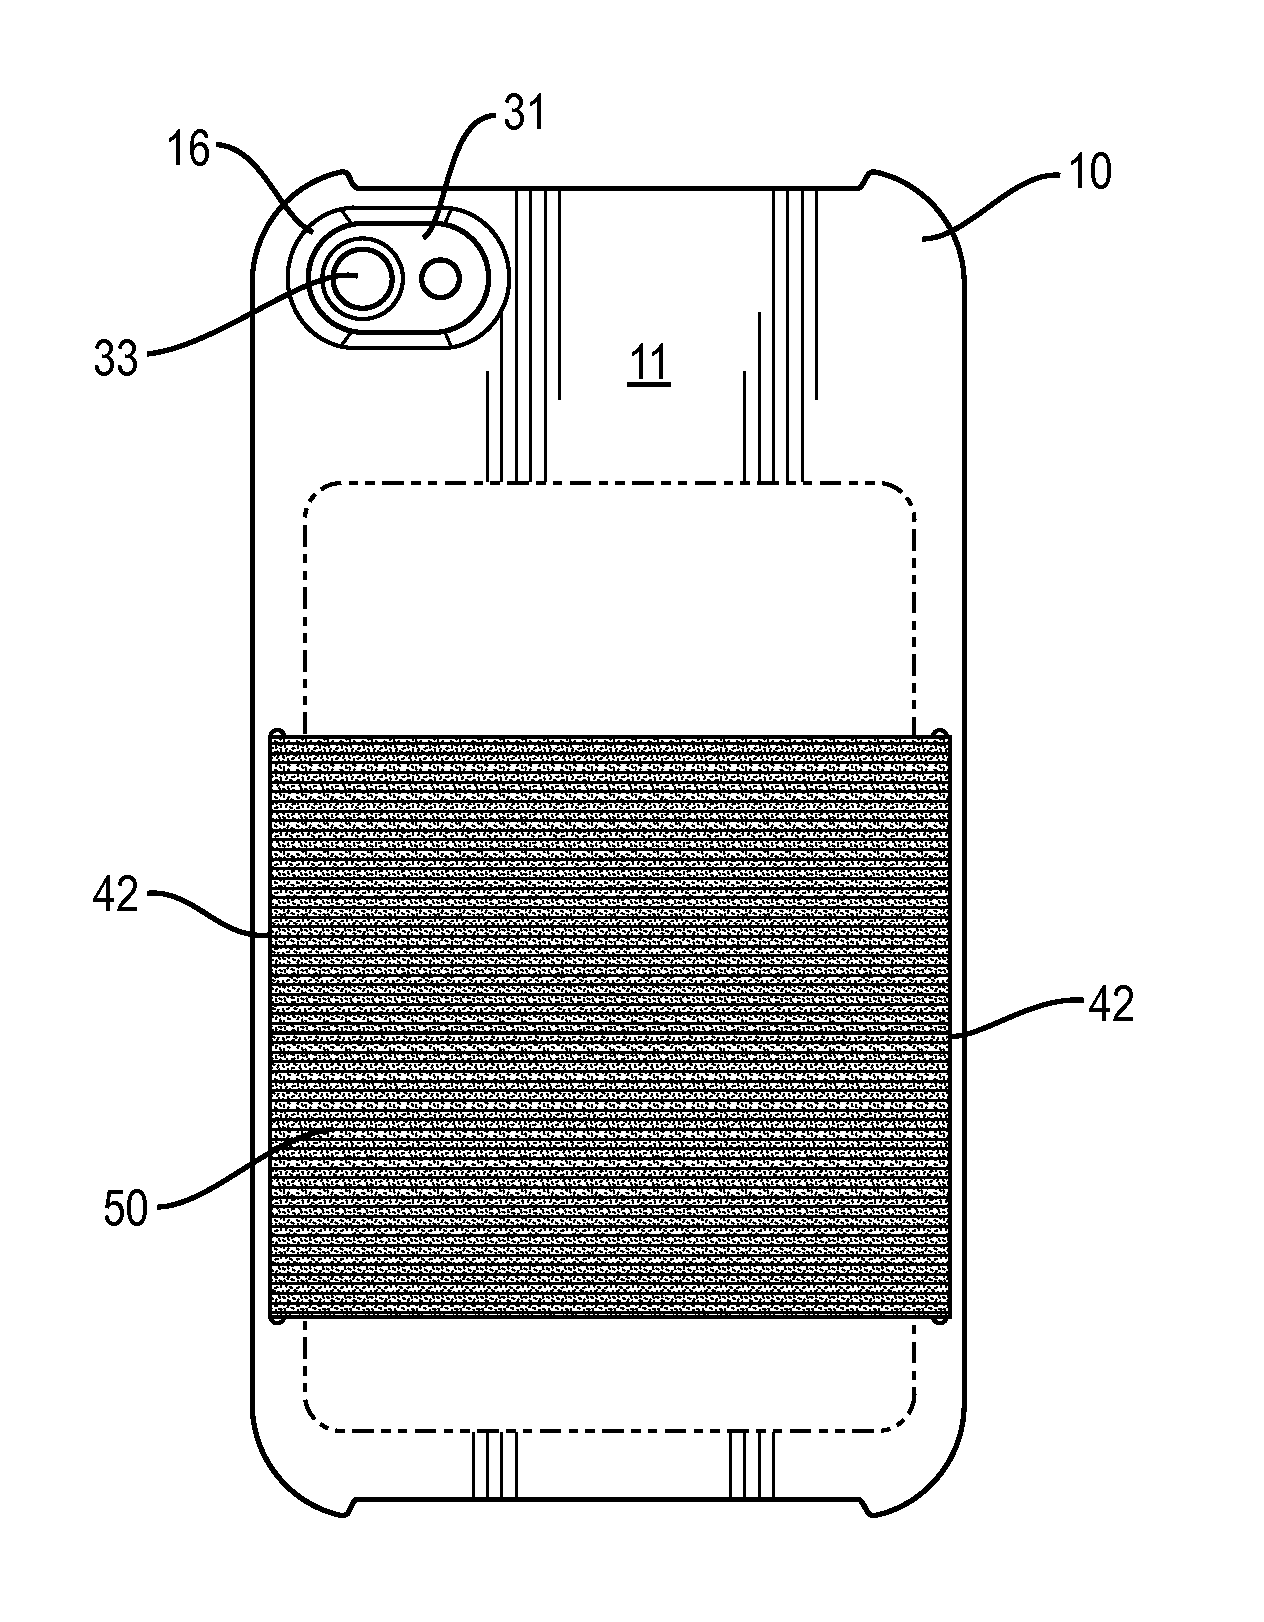 Cover Having Wallet Feature for Electronic Devices